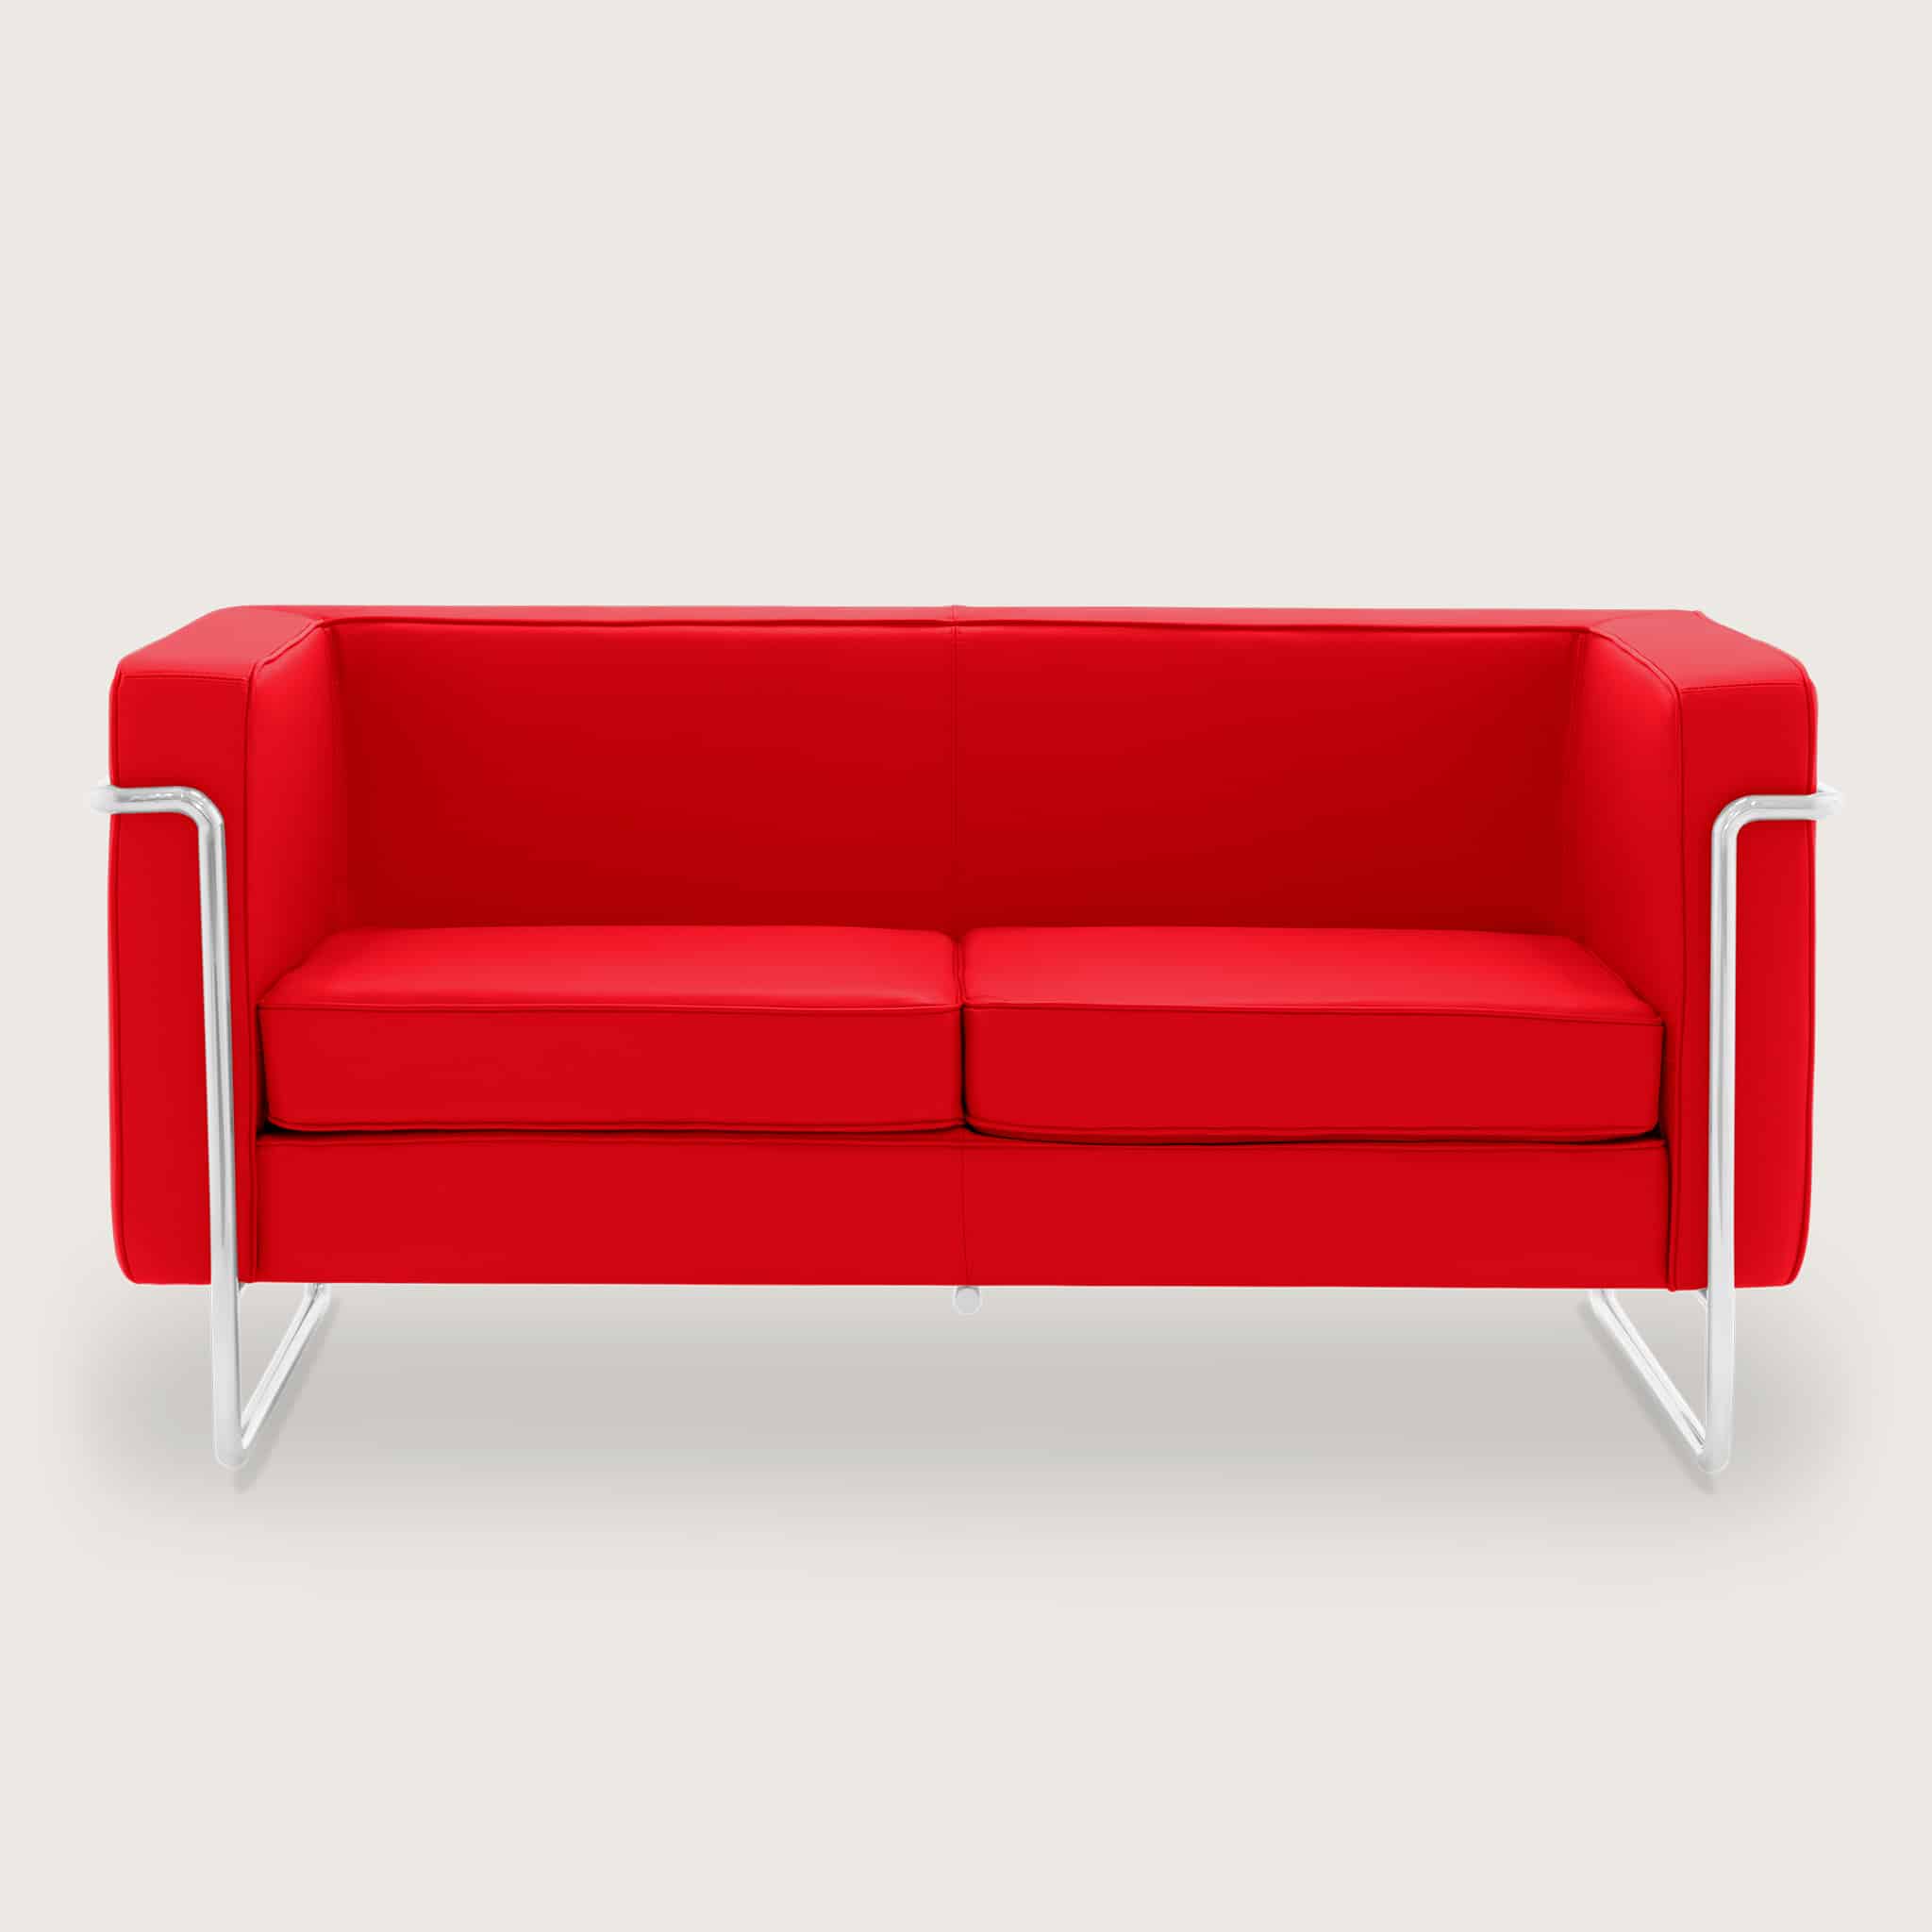 Le Bauhaus Dragon Red Leather 2 Seater 1